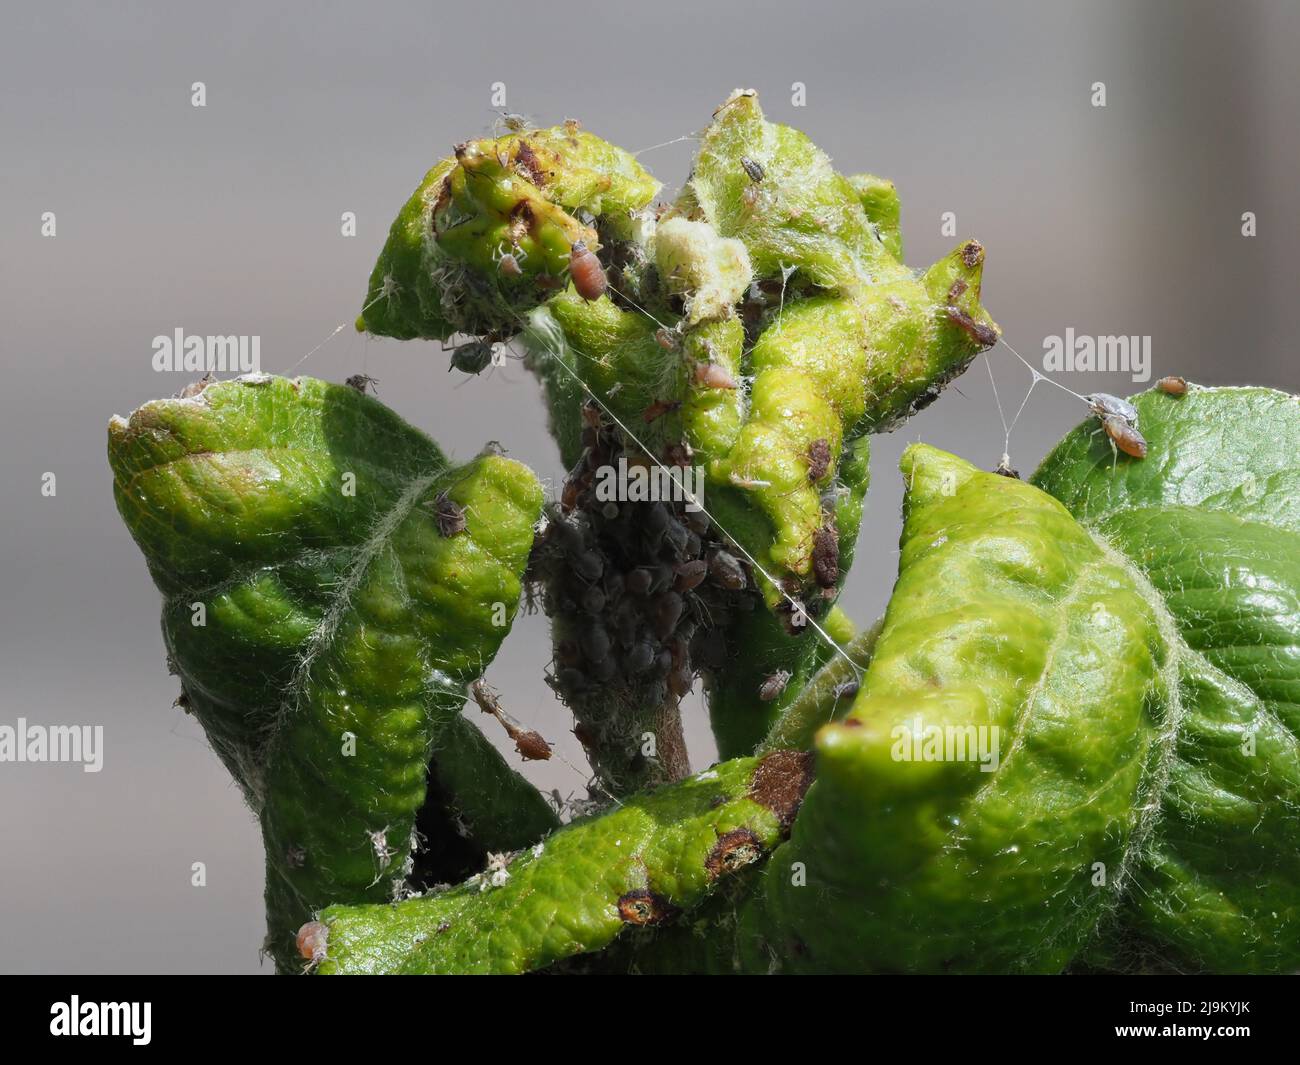 Apids attacking leaves on apple tree Stock Photo